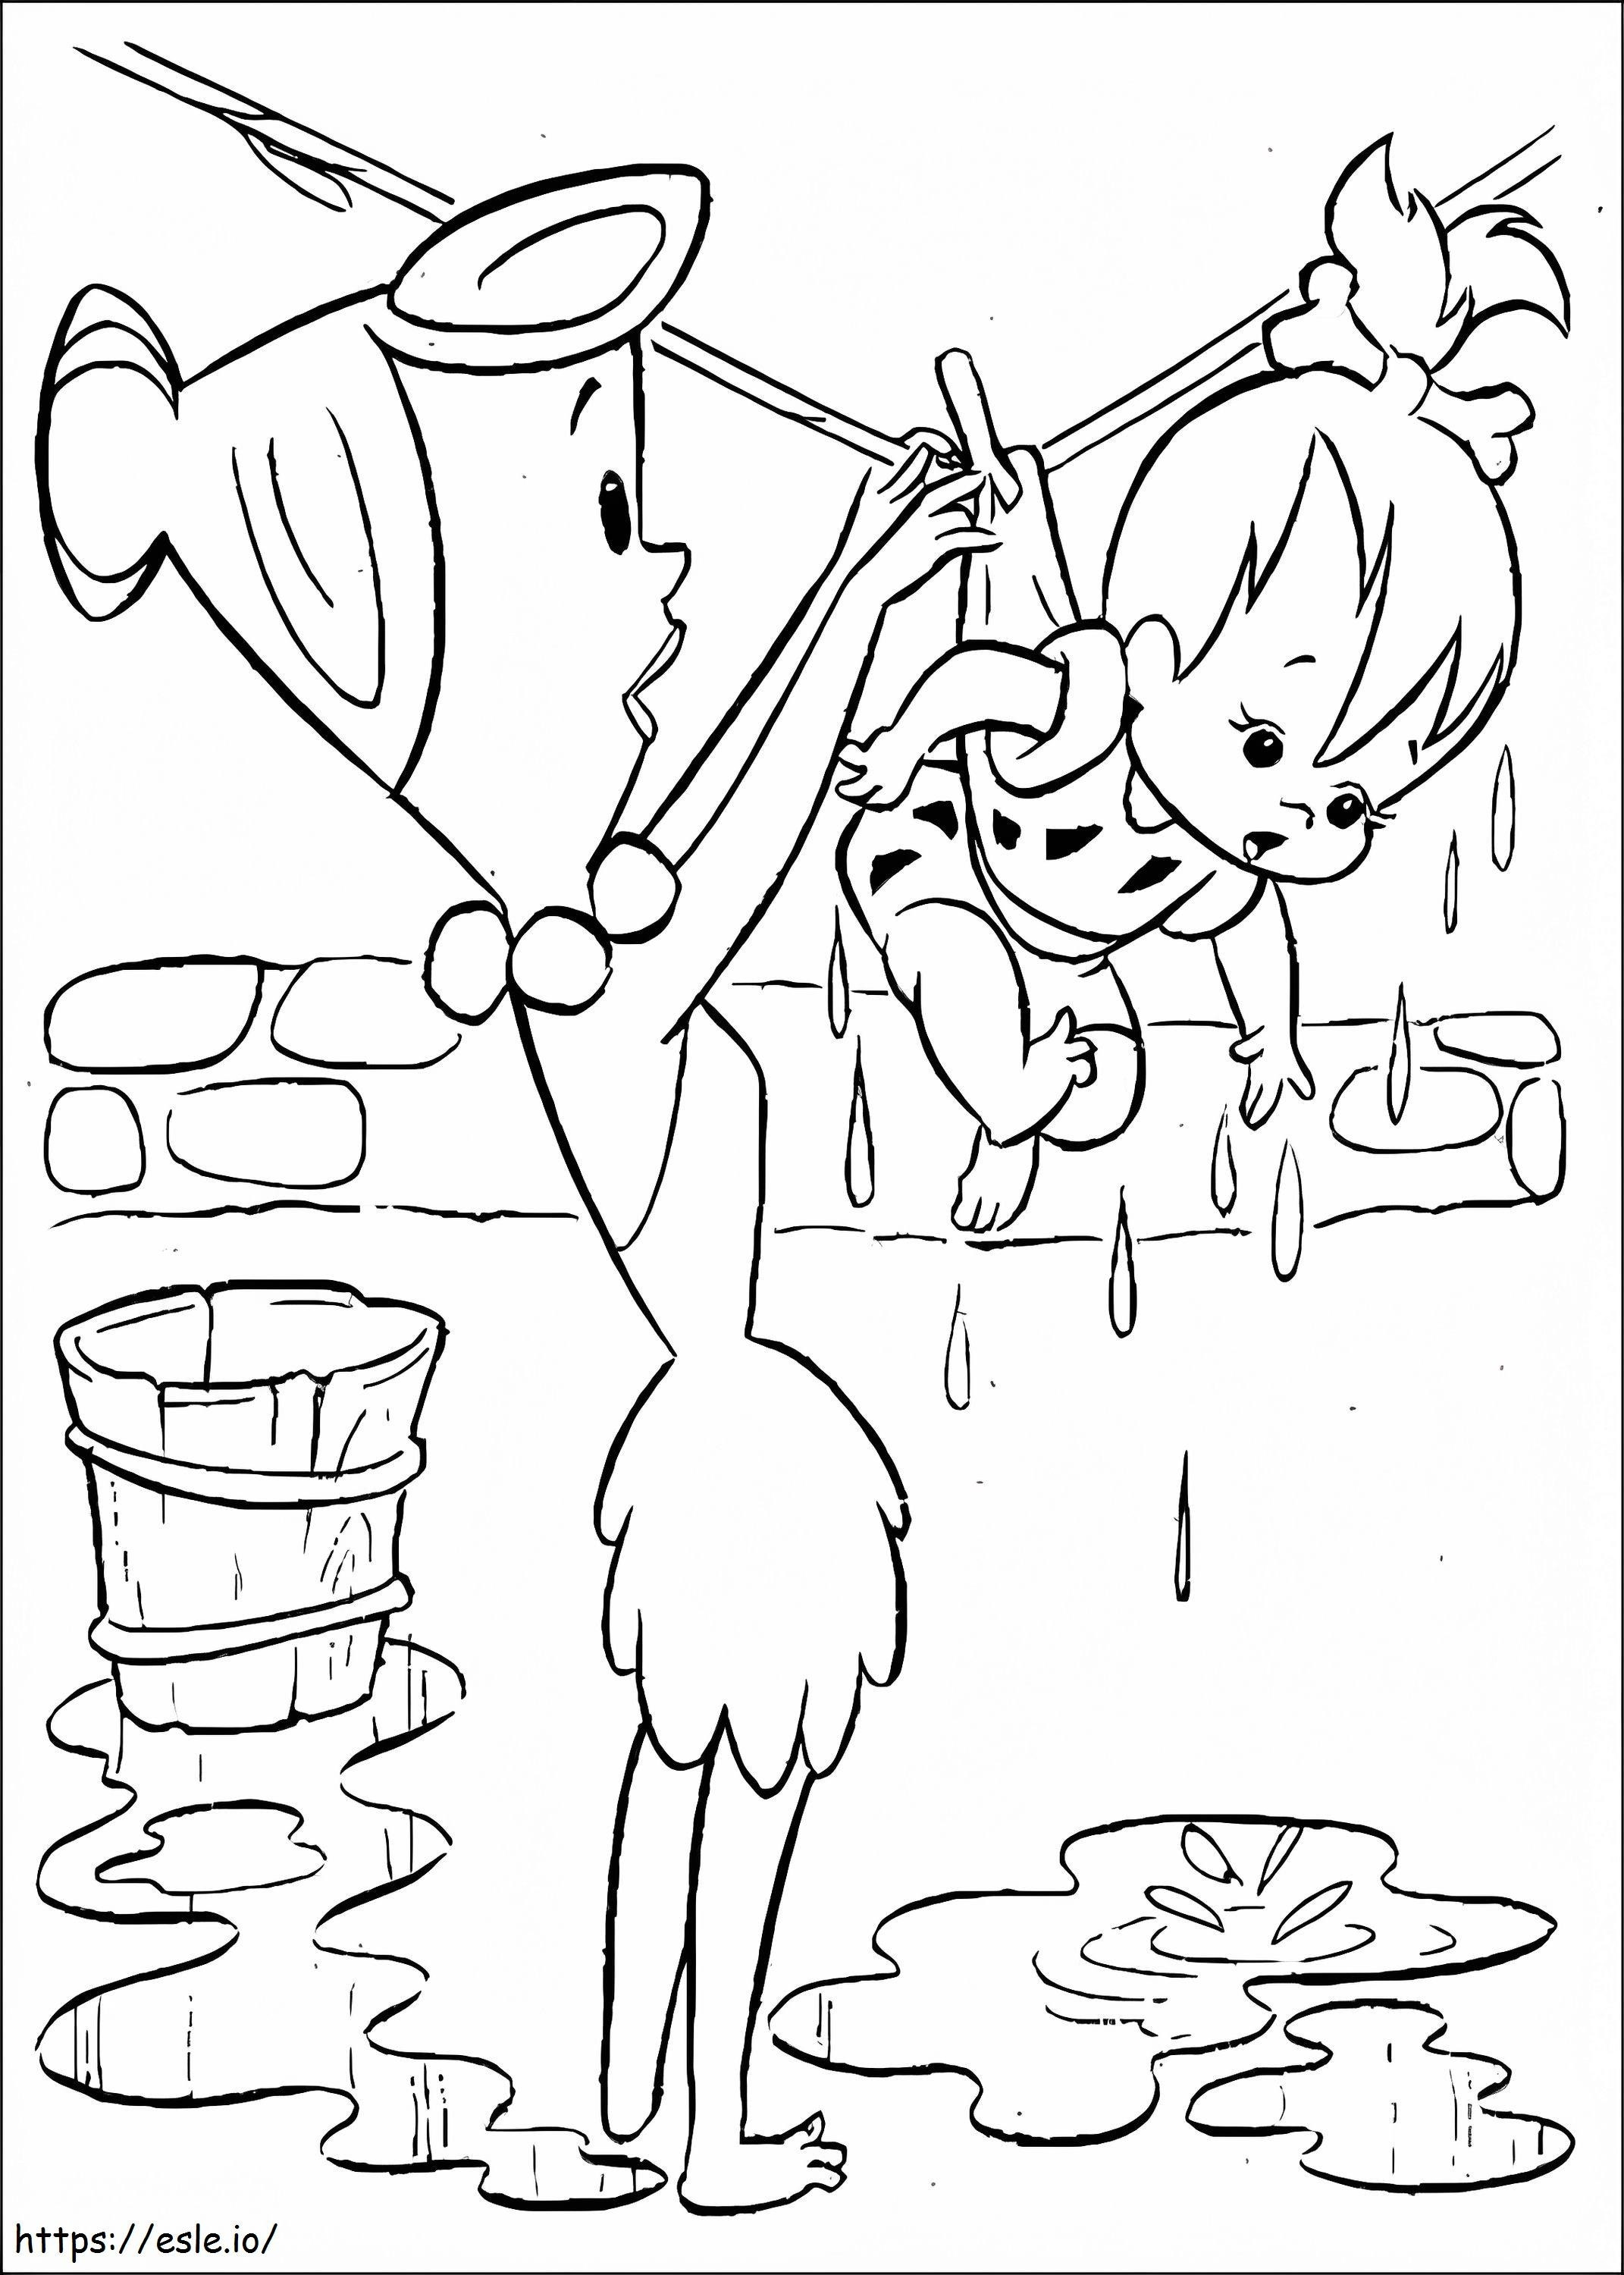 Wilma And Pebbles Flintstone coloring page